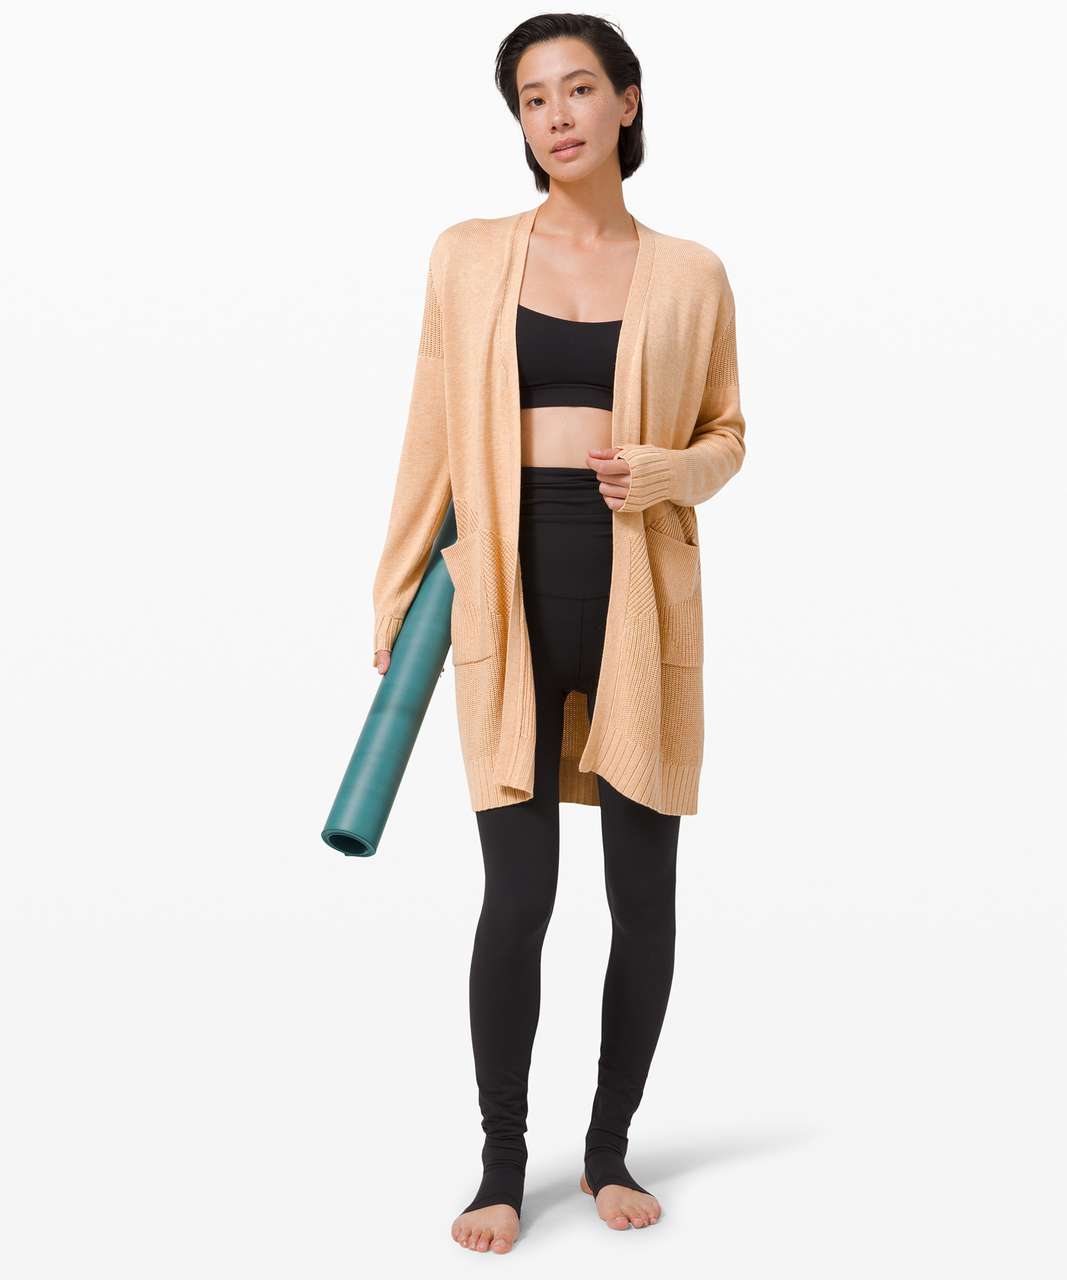 Lululemon Sincerely Yours Wrap Sweater - Heathered Ivory Peach